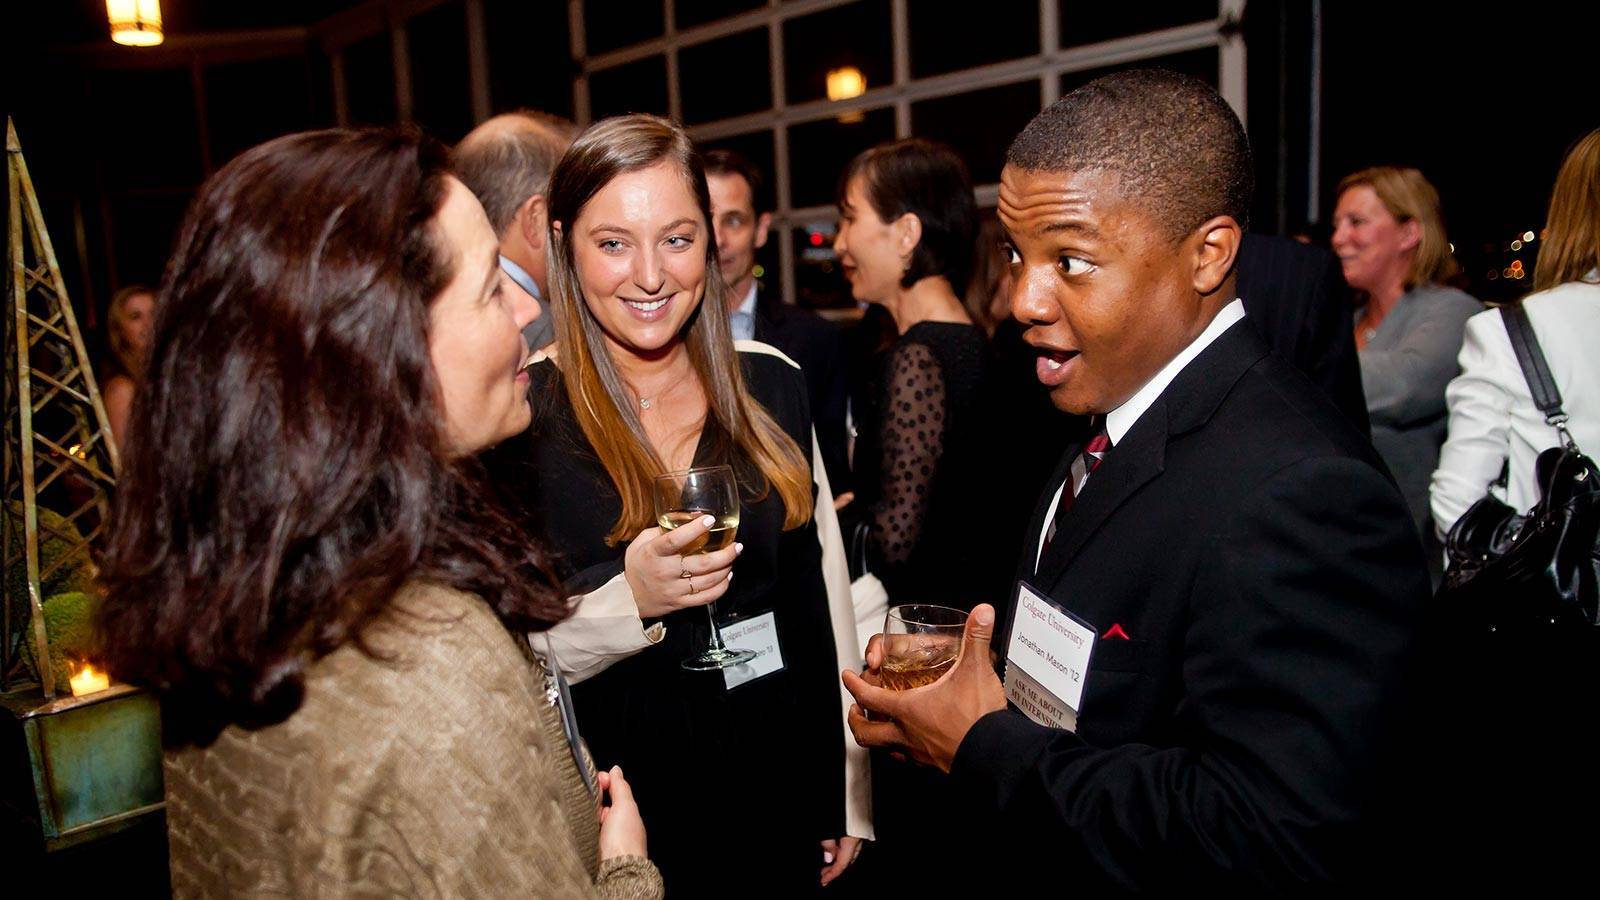 Alumni converse over drinks at an off-campus Colgate event.=